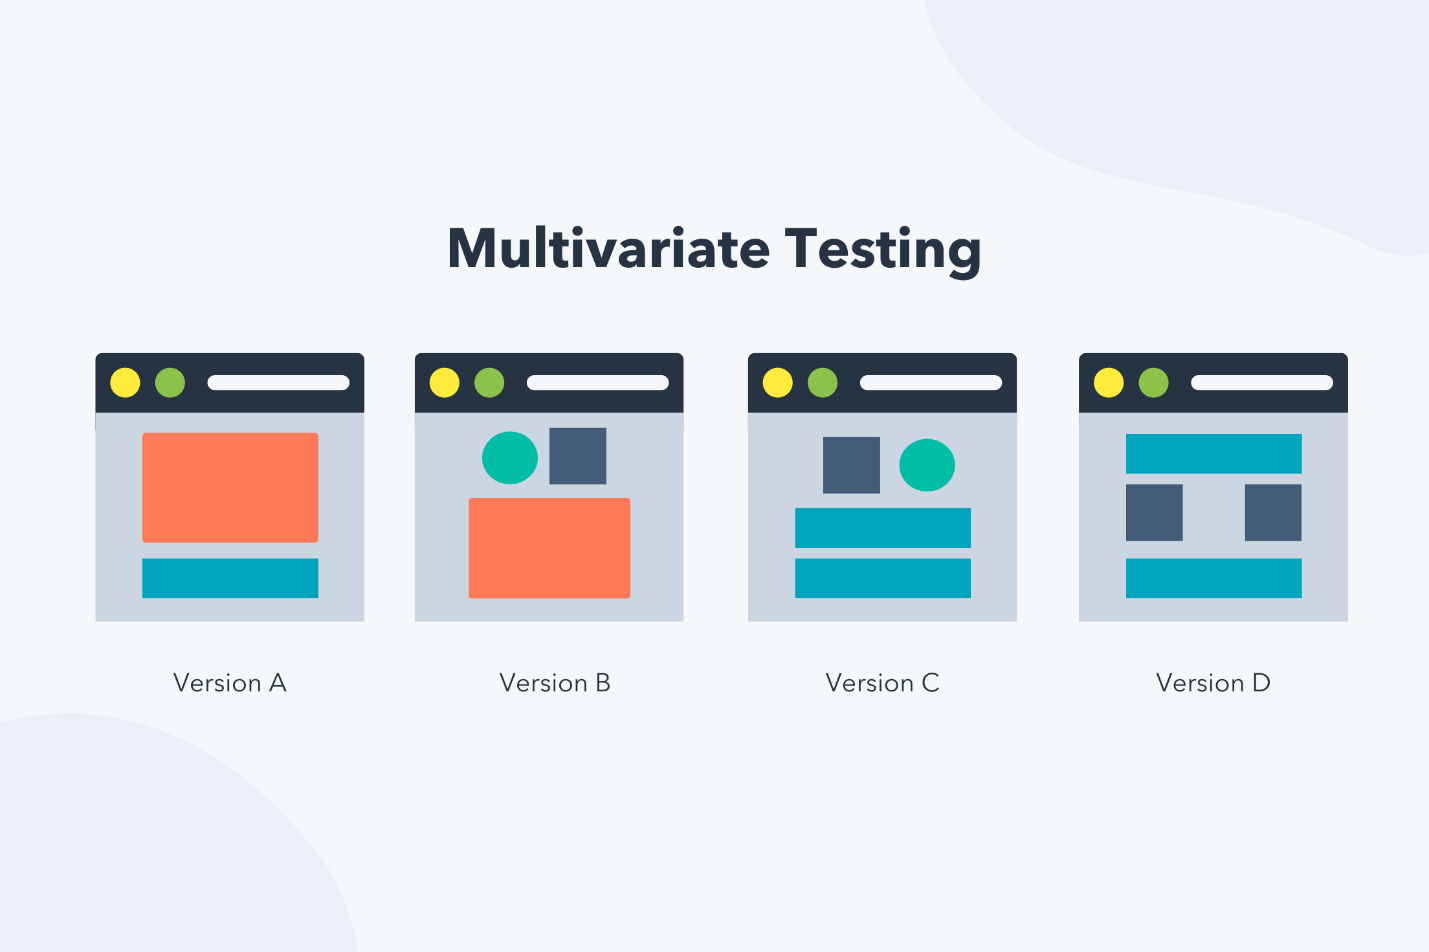 The Key Difference Between Multivariate Testing & A/B Testing